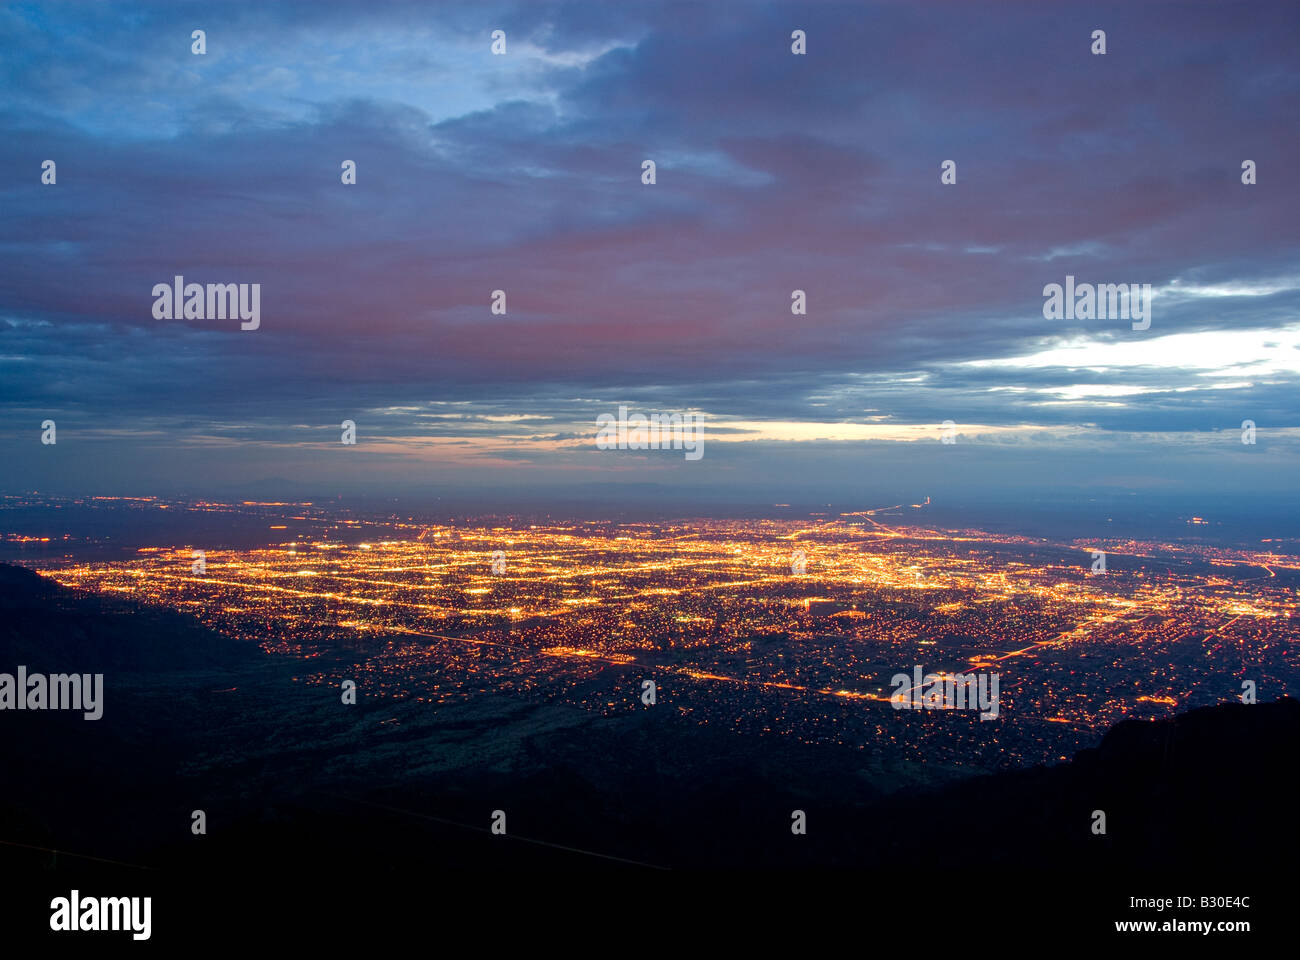 A nighttime view of the Albuquerque from the Sandia Peak Stock Photo